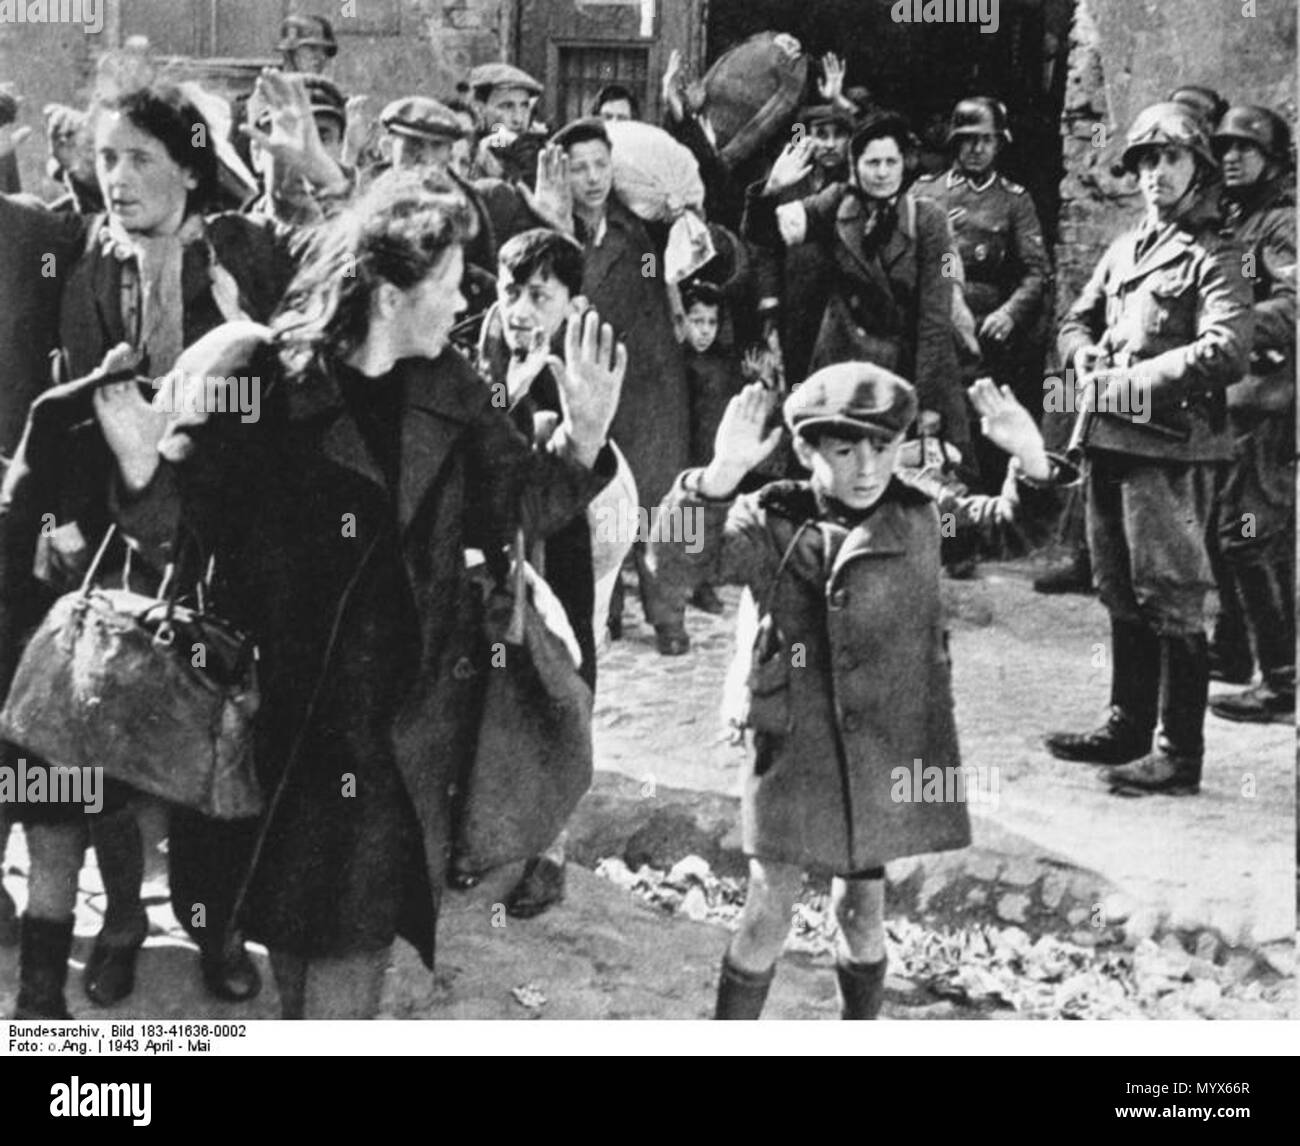 .  Information added by Wikimedia users.  Note: This is a low-quality, cropped version of a famous photo acquired from an East German/GDR archive (ADN). For the complete photograph (with the little girl Hanka Lamet on the left) see the other versions. English: Warsaw Ghetto Uprising - Photo from Jürgen Stroop Report to Heinrich Himmler from May 1943. The original German caption reads: 'Forcibly pulled out of dug-outs'. People recognized in the picture: Boy in the front was not recognized, some possible identities: Artur Dab Siemiatek, Levi Zelinwarger (next to his mother Chana Zelinwarger) and Stock Photo